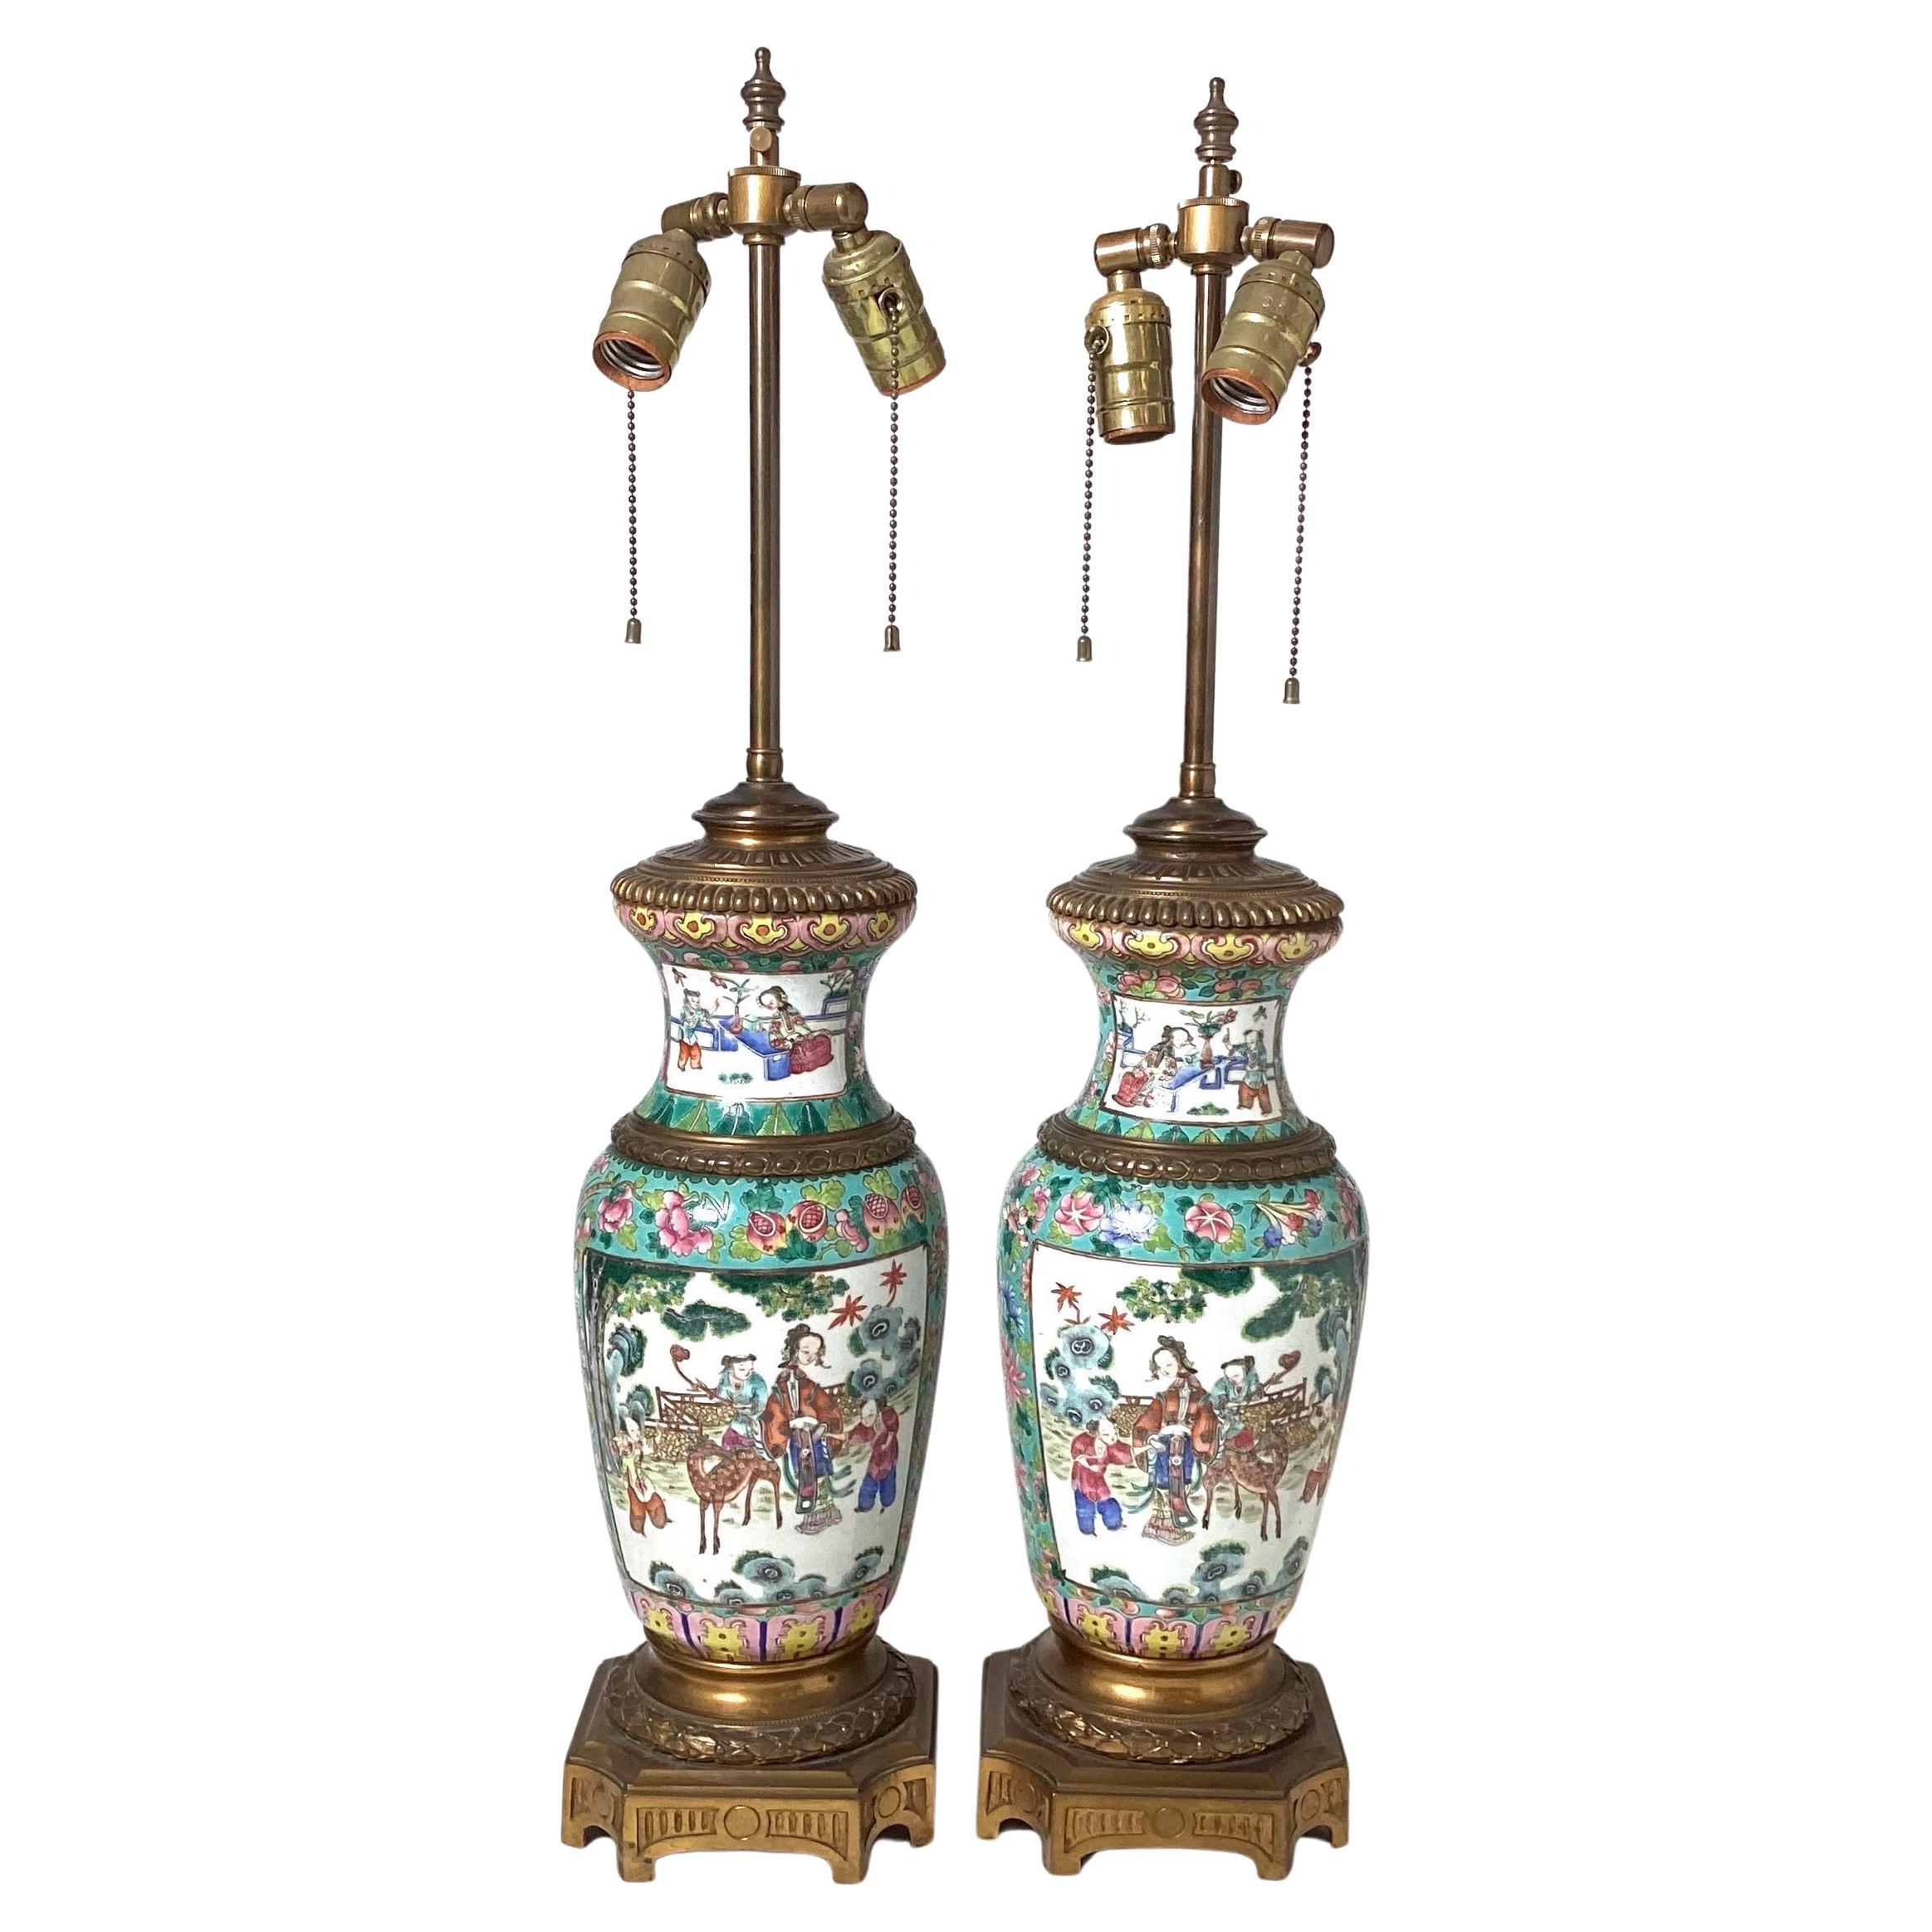 Stunning Pair of Early 19th Century Chinese Export Bronze Mounted Lamps For Sale